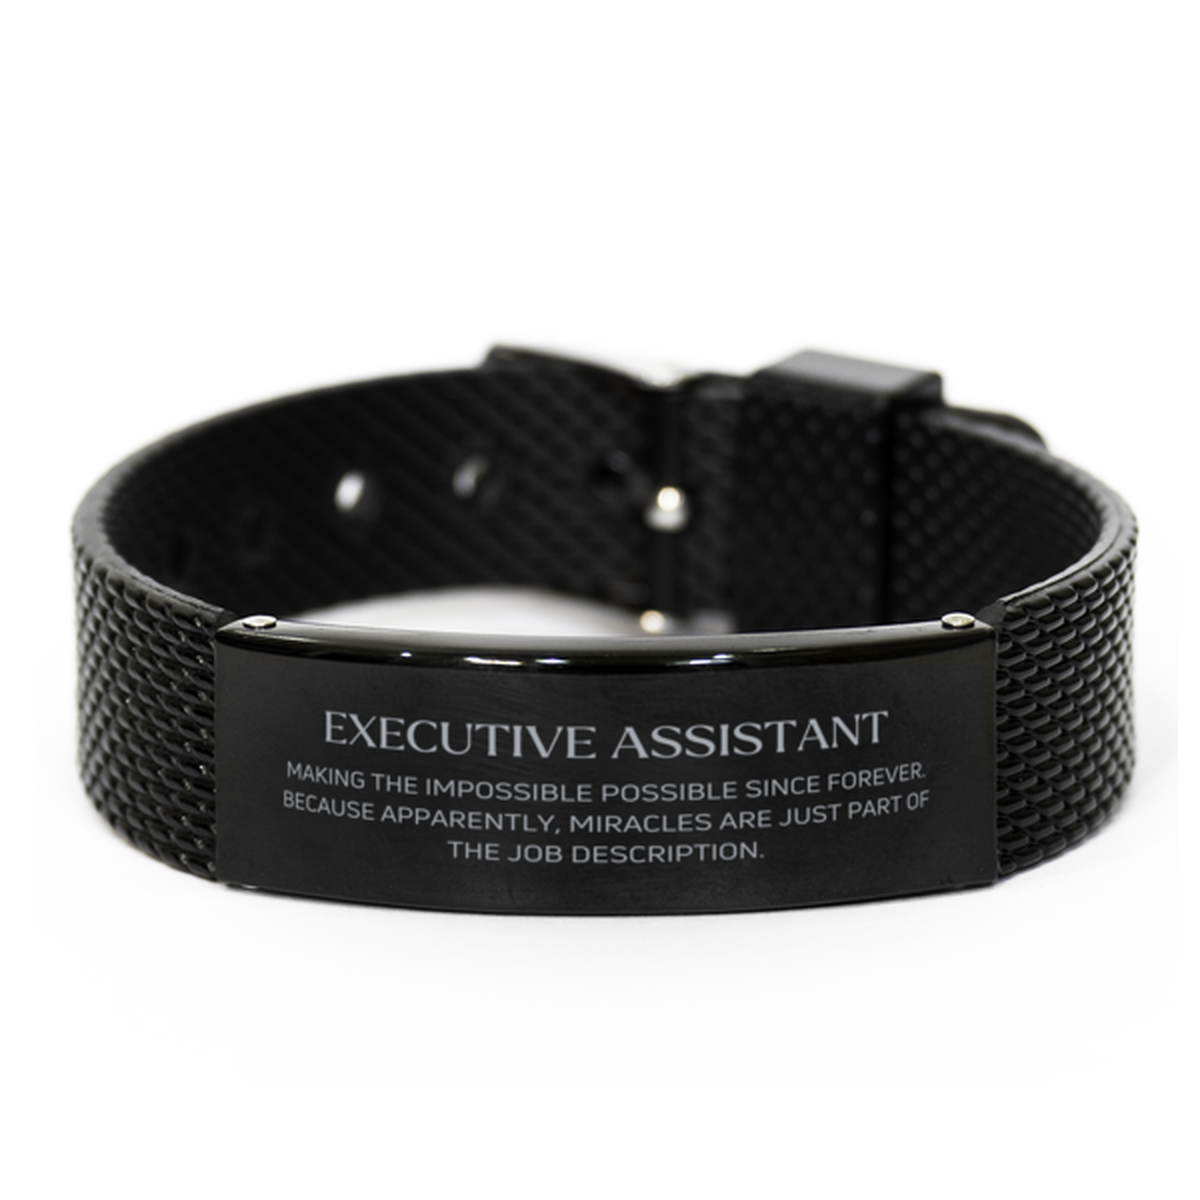 Funny Executive Assistant Gifts, Miracles are just part of the job description, Inspirational Birthday Black Shark Mesh Bracelet For Executive Assistant, Men, Women, Coworkers, Friends, Boss